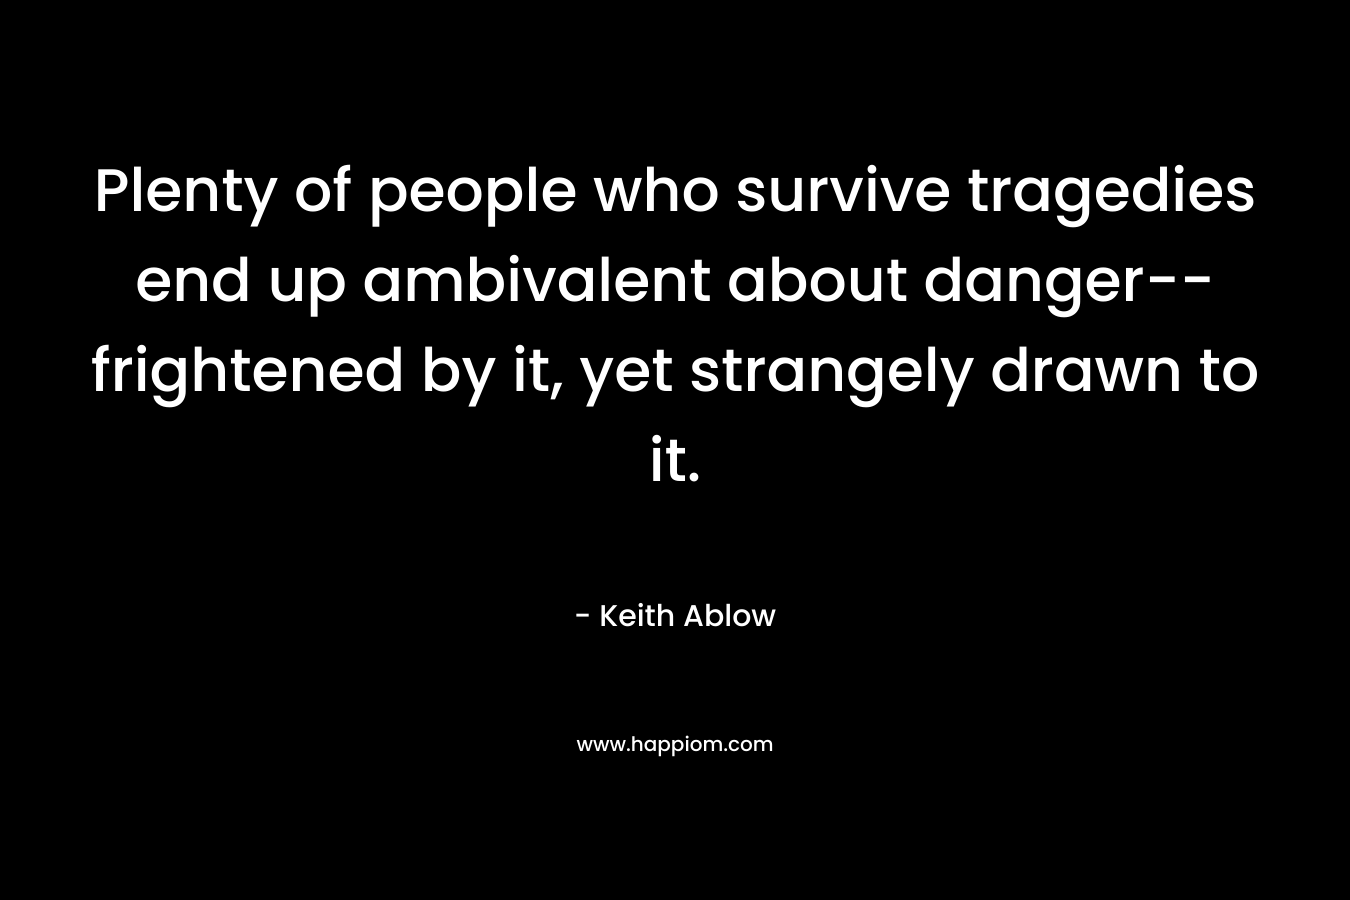 Plenty of people who survive tragedies end up ambivalent about danger--frightened by it, yet strangely drawn to it.